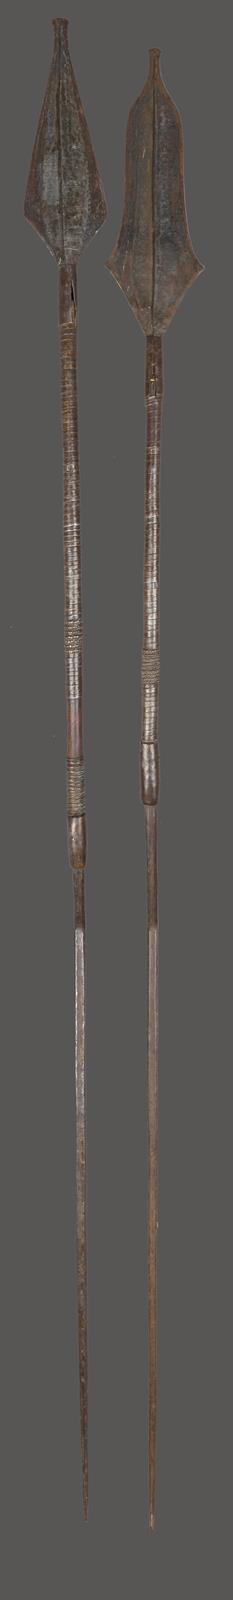 Two Mbole spears Democratic Republic of the Congo the iron tips with linear decoration on coil metal